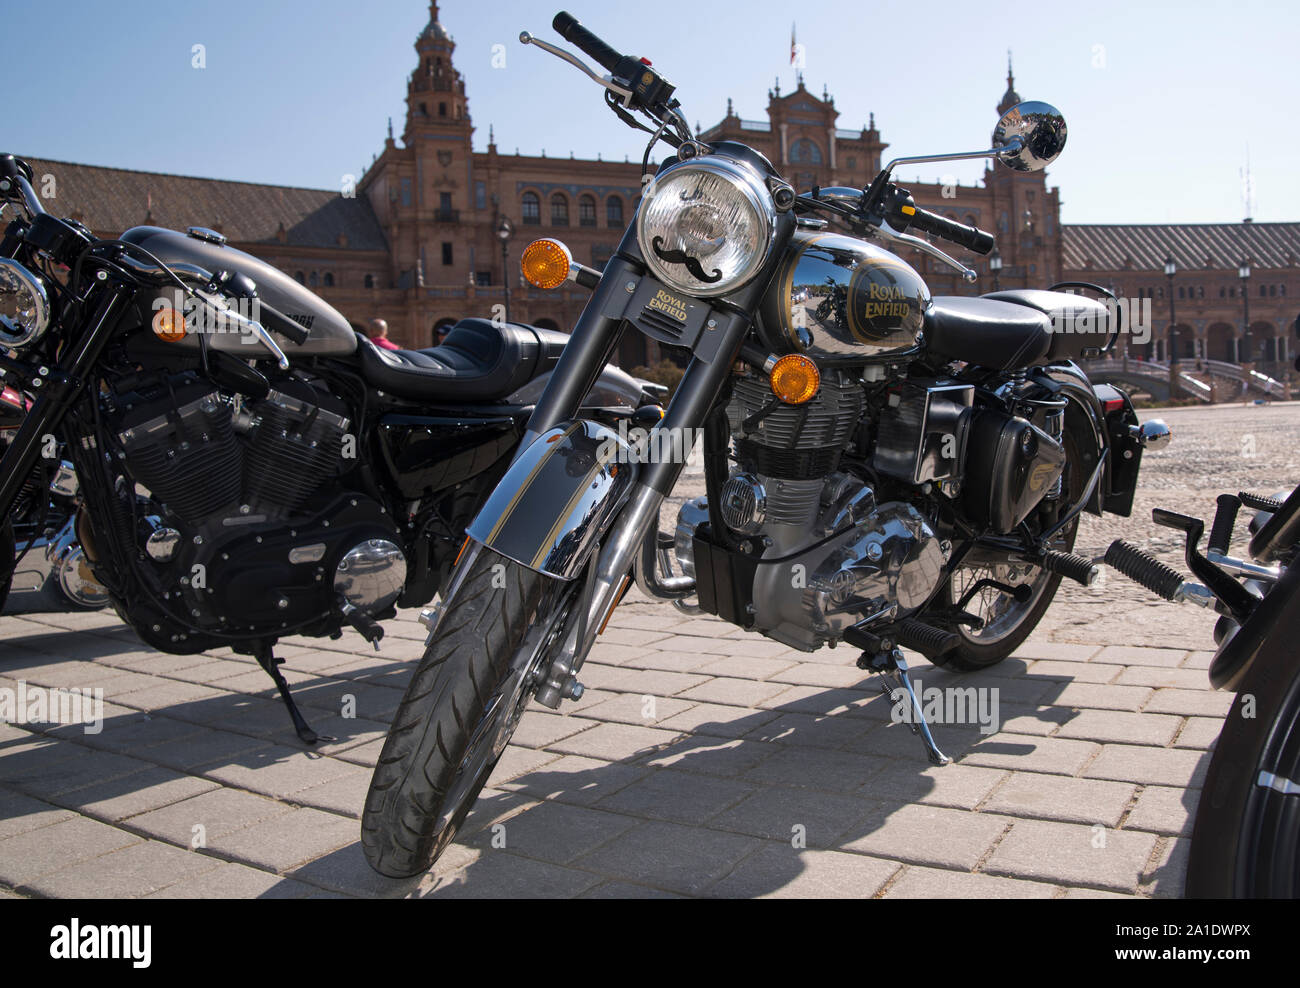 Seville, Andalusia, Spain - Motorcycles lined up at the Plaza de España for the Distinguished Gentleman's Ride. Stock Photo